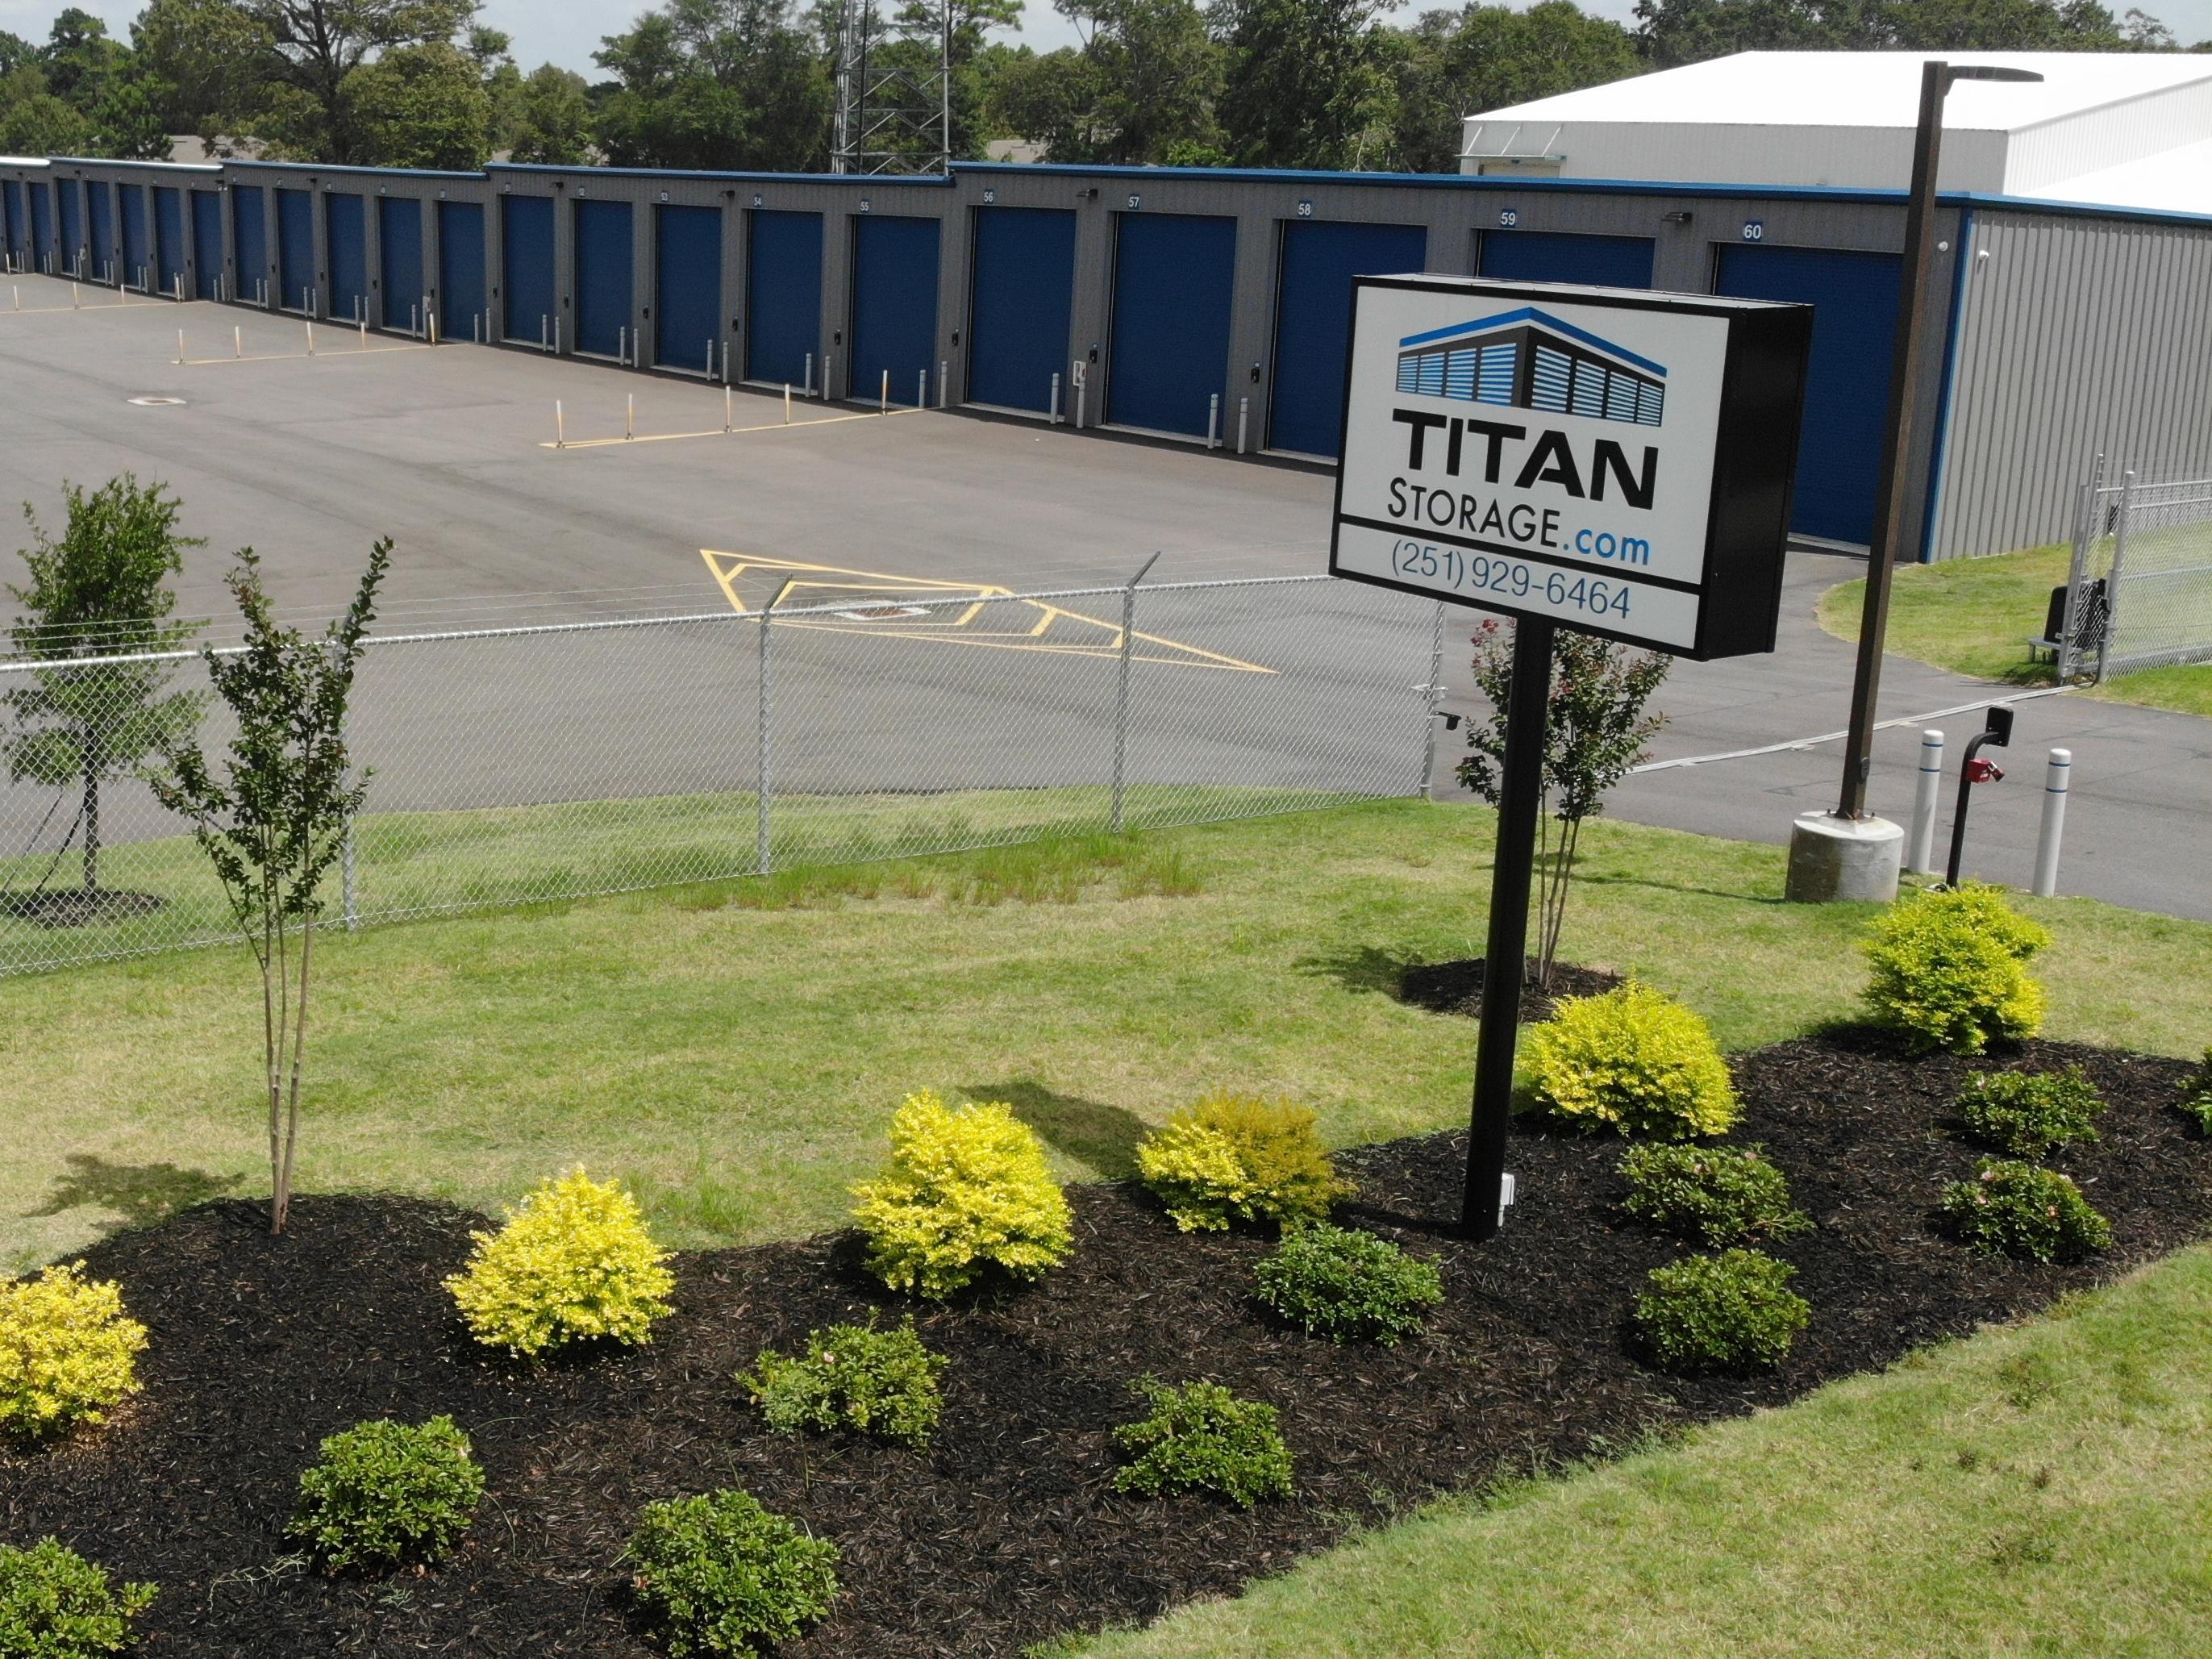 GET IN TOUCH WITH TITAN STORAGE FOR YOUR Mobile, AL BOAT STORAGE UNIT SOLUTION